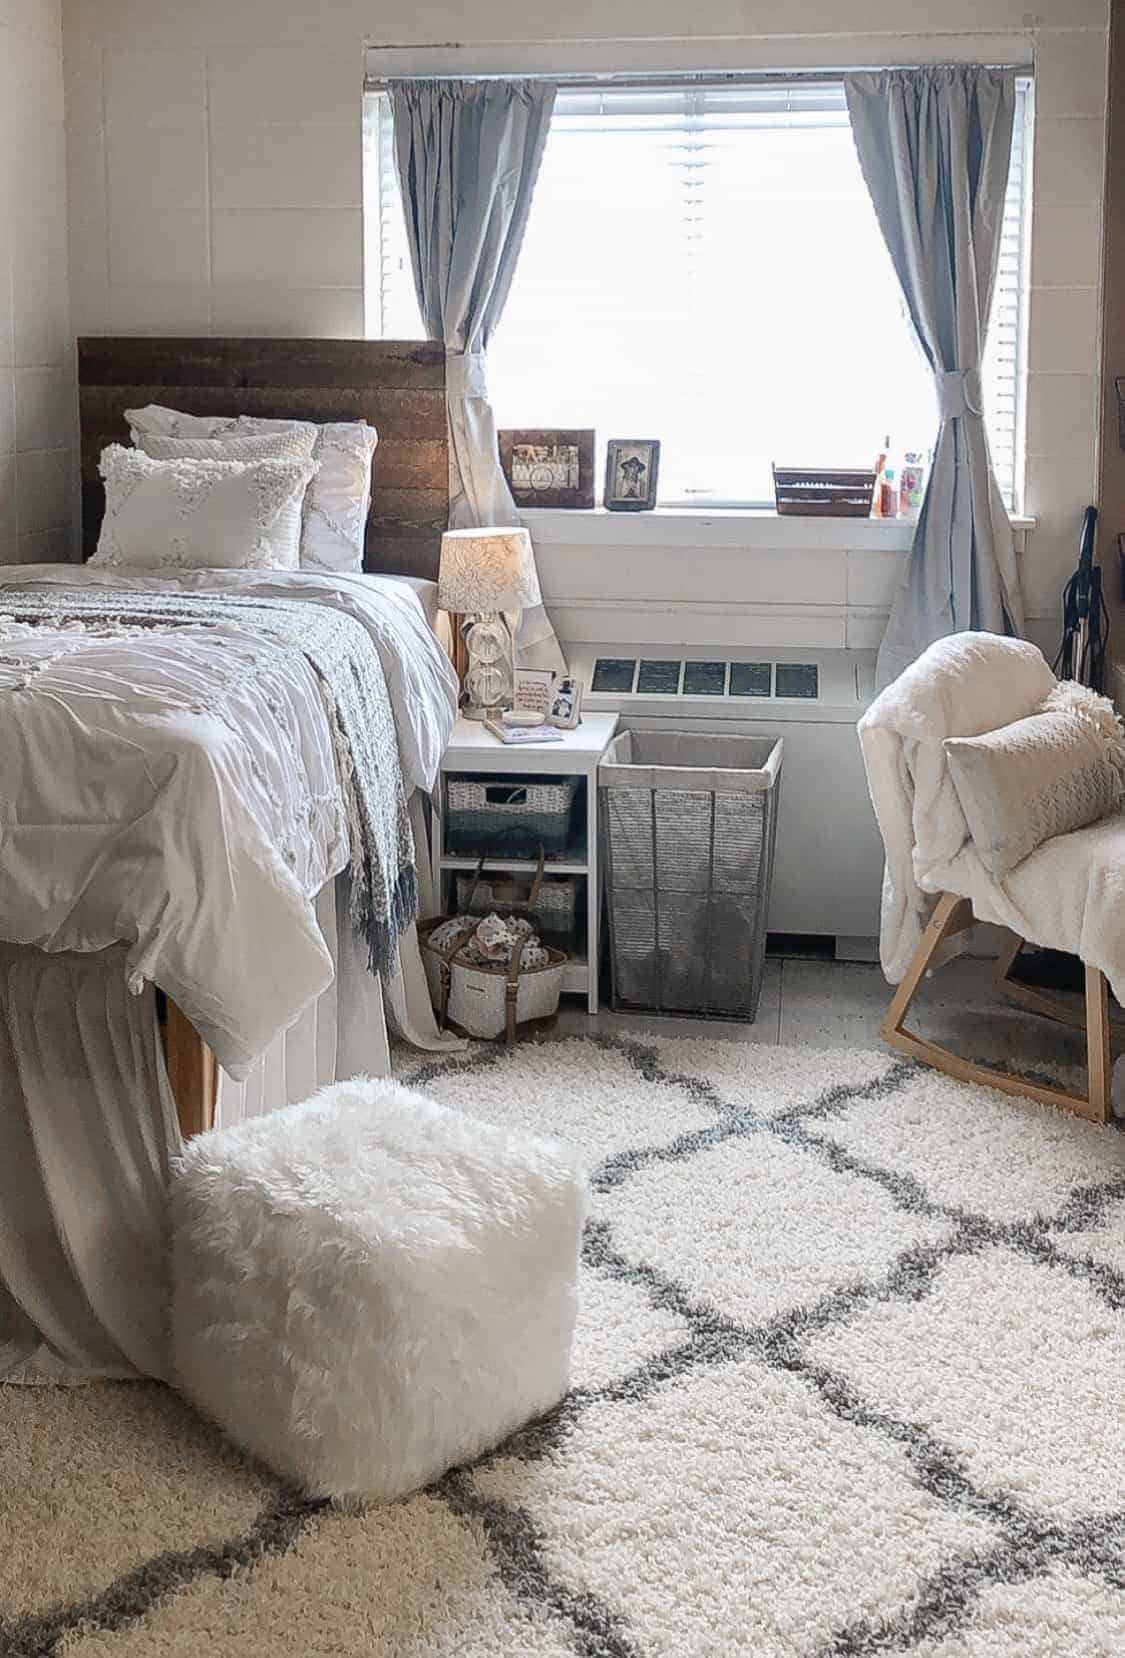 31 College Apartment Bedroom Ideas You Need to See - College Savvy